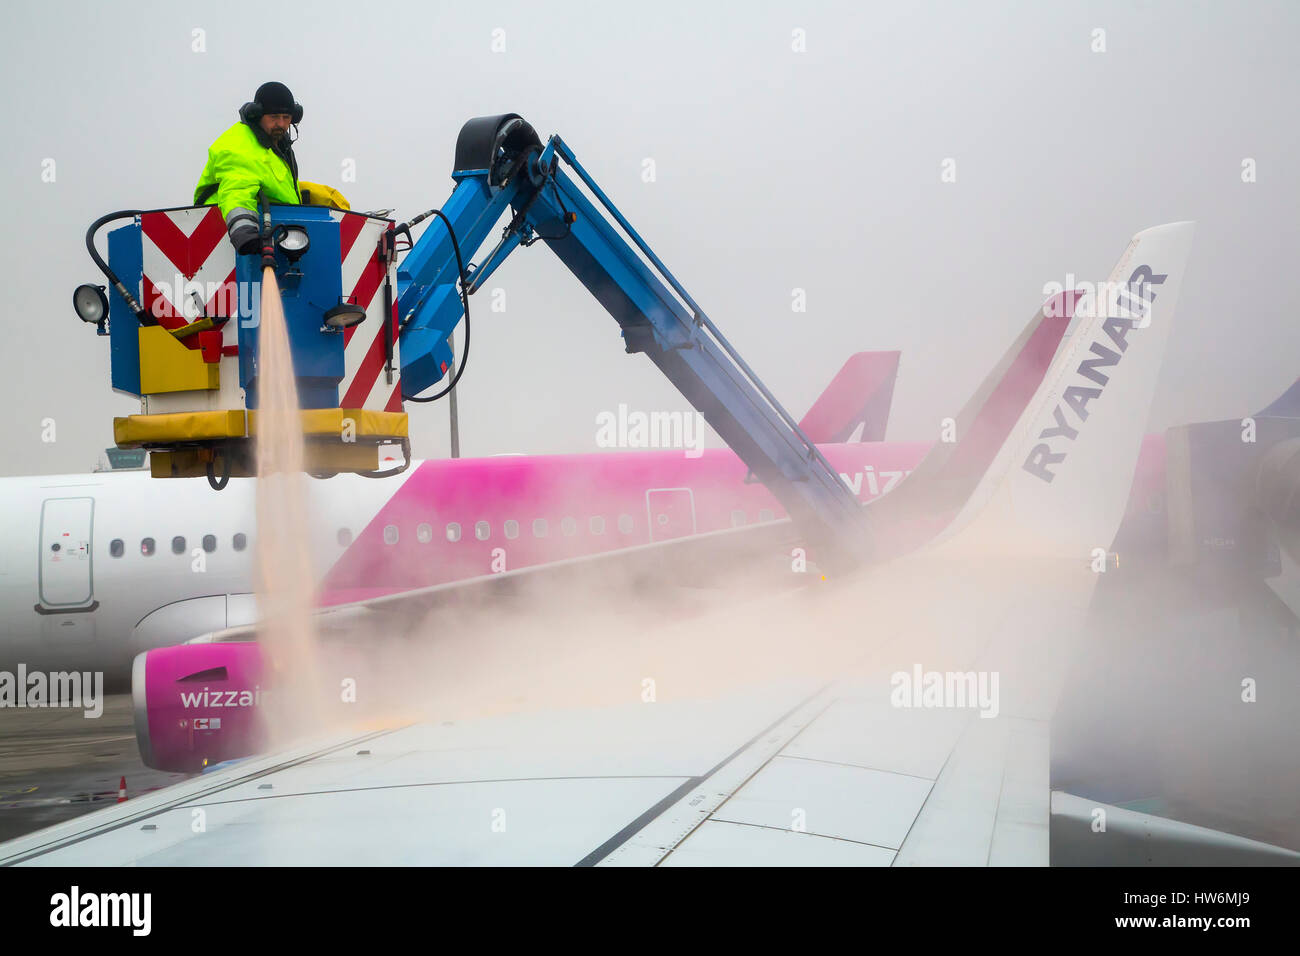 Clearing Ice And De-icing Aircraft. Budapest airport. Hungary, Southeast Europe Stock Photo